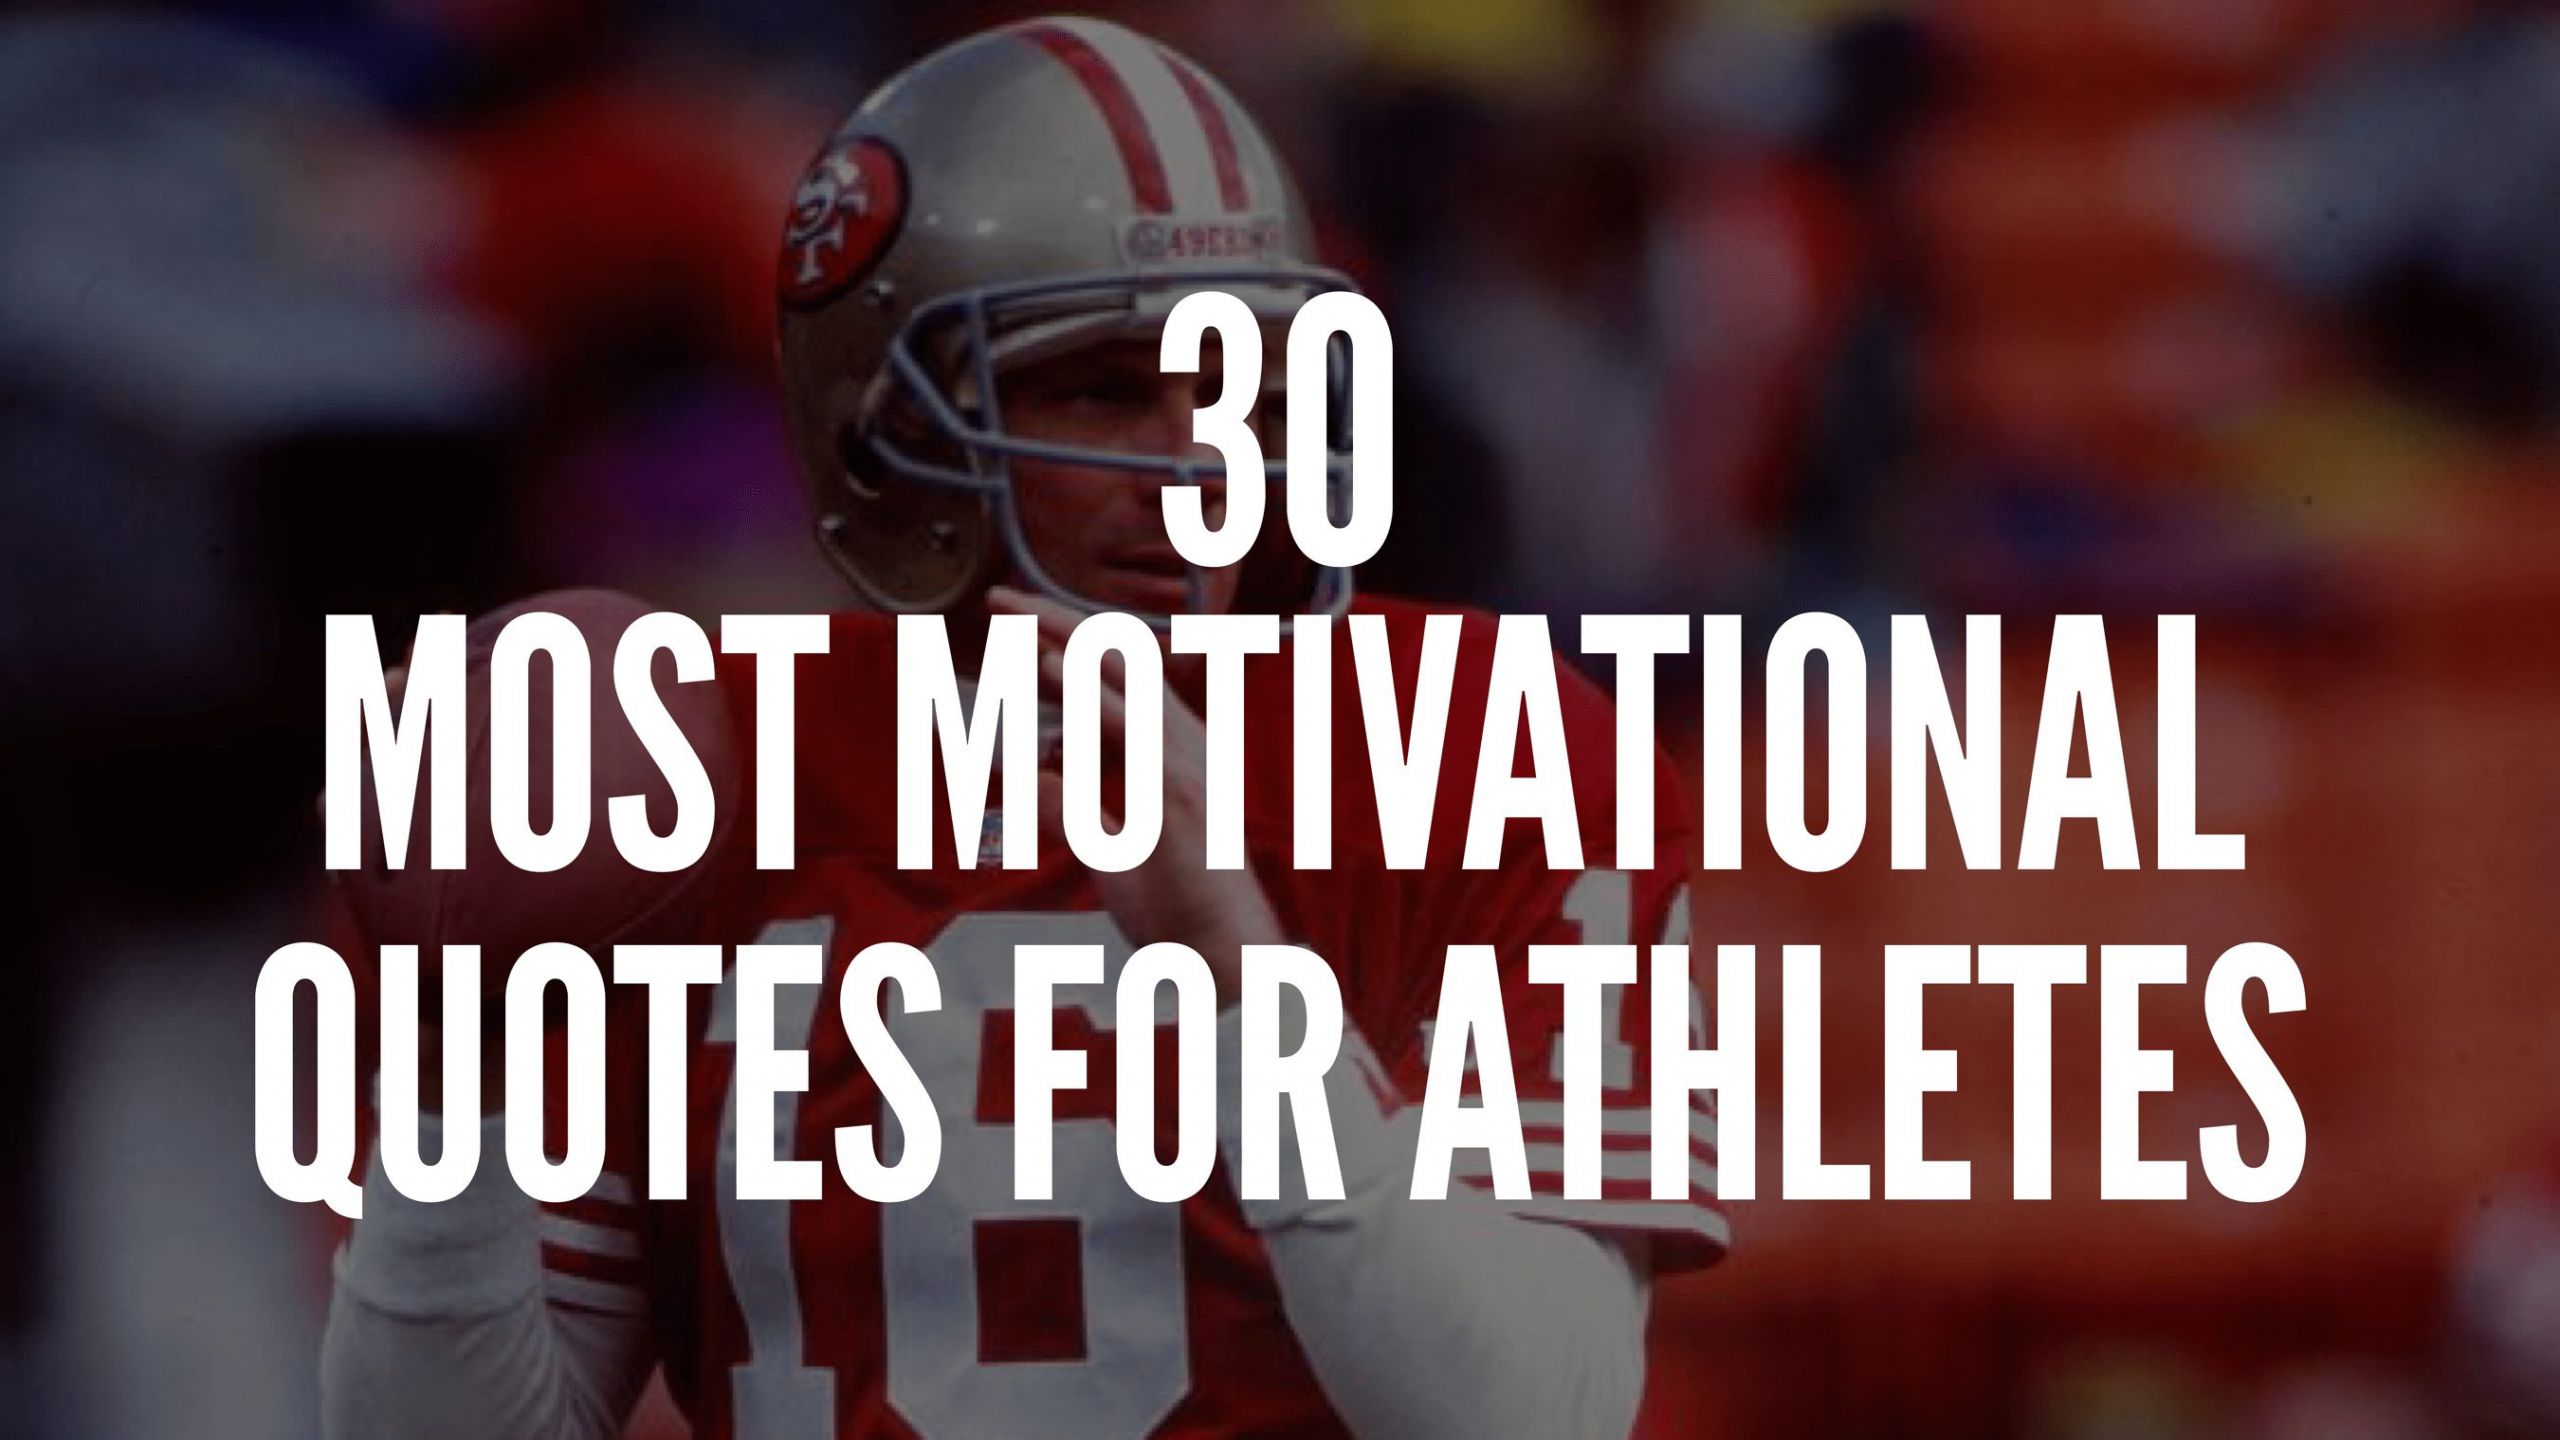 Motivational Quotes For Athletes
 30 Most Motivational Quotes For Athletes